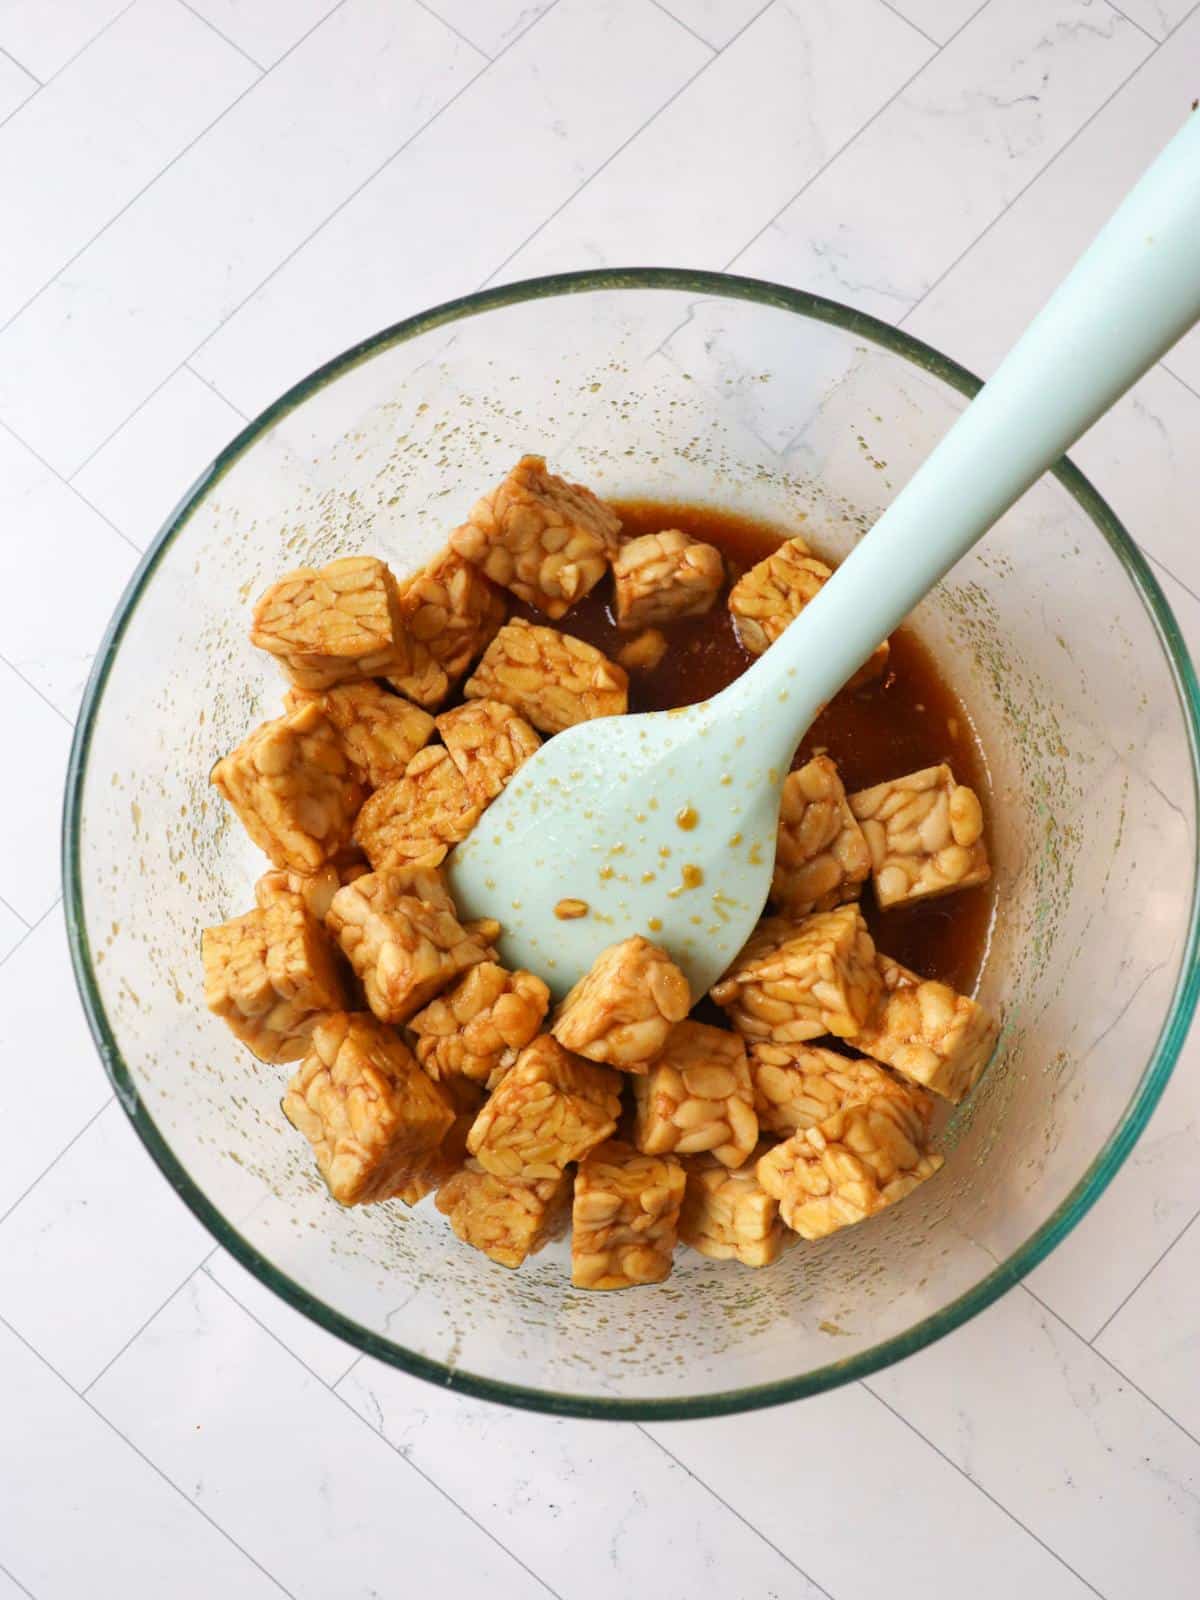 Tempeh cubes marinating in a sauce in a glass bowl.